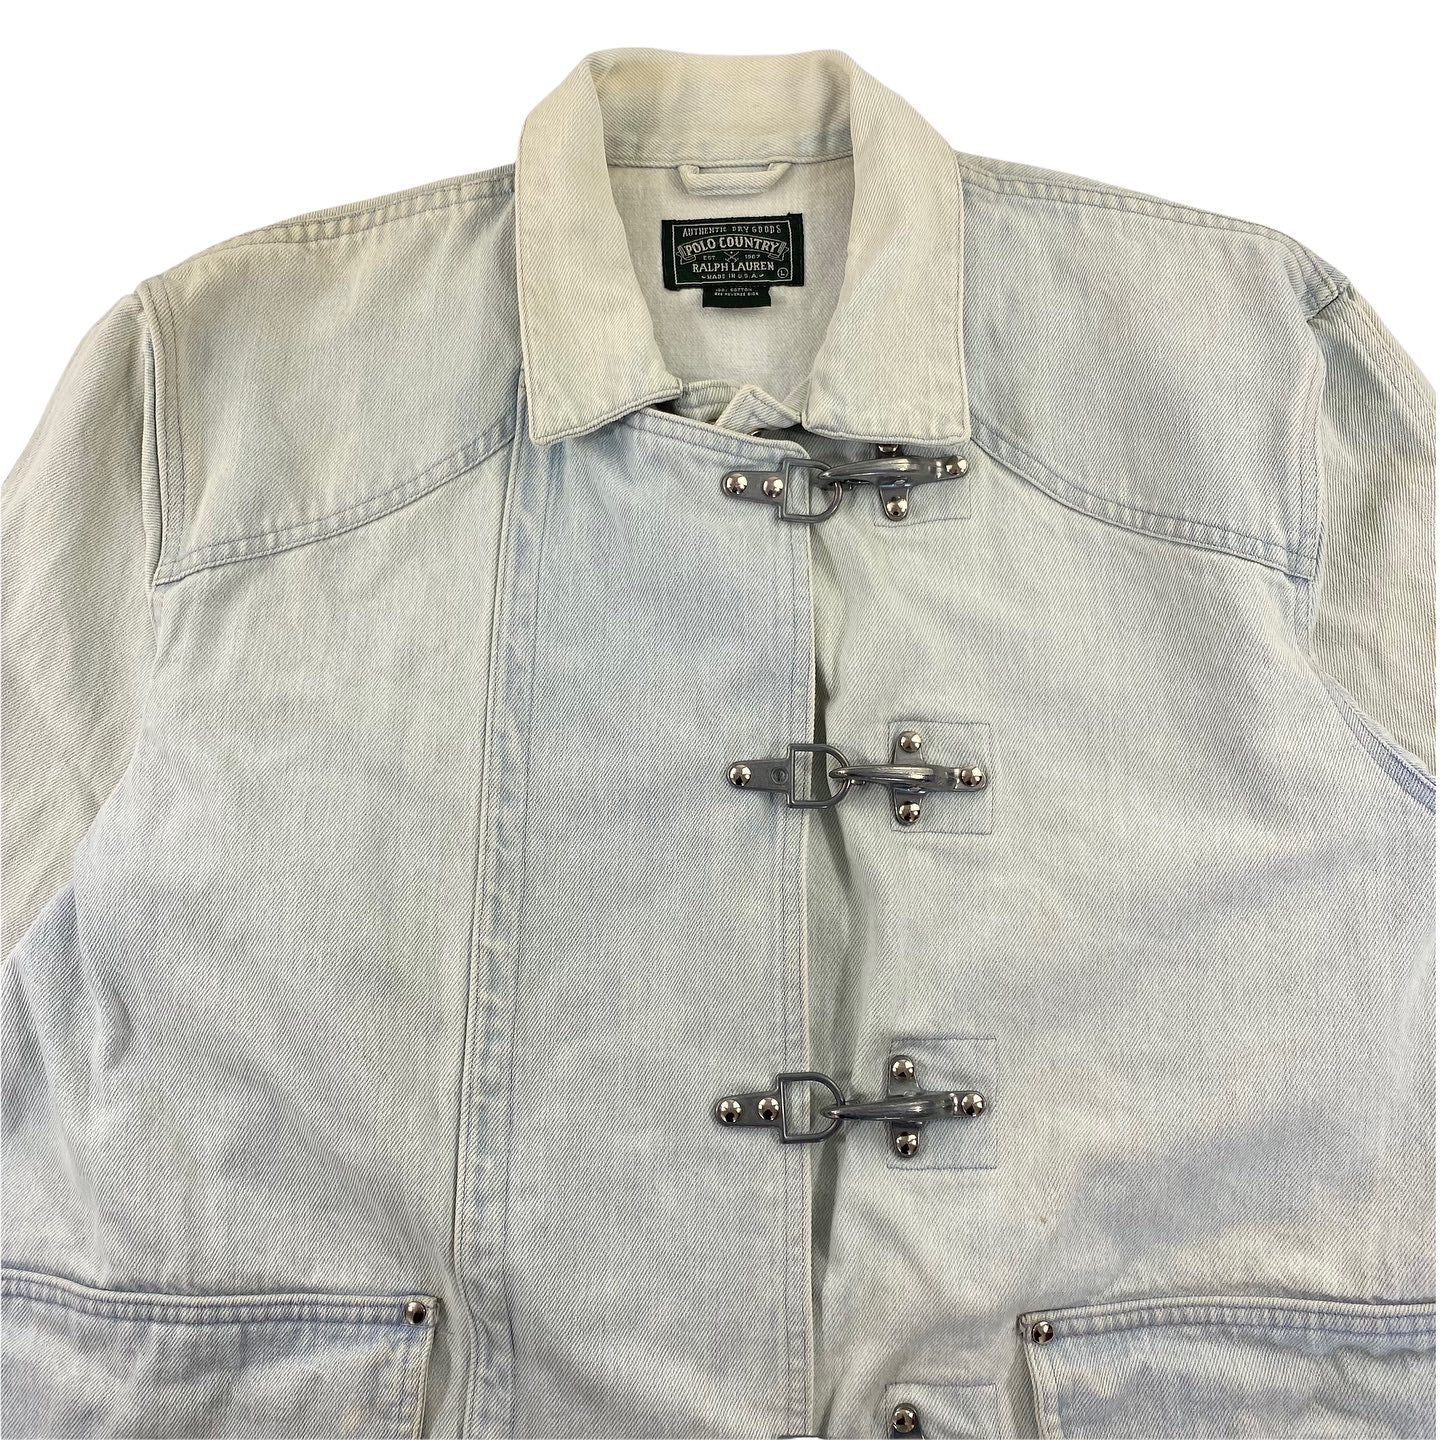 Polo country washed out blue fireman’s clasp denim jacket Large